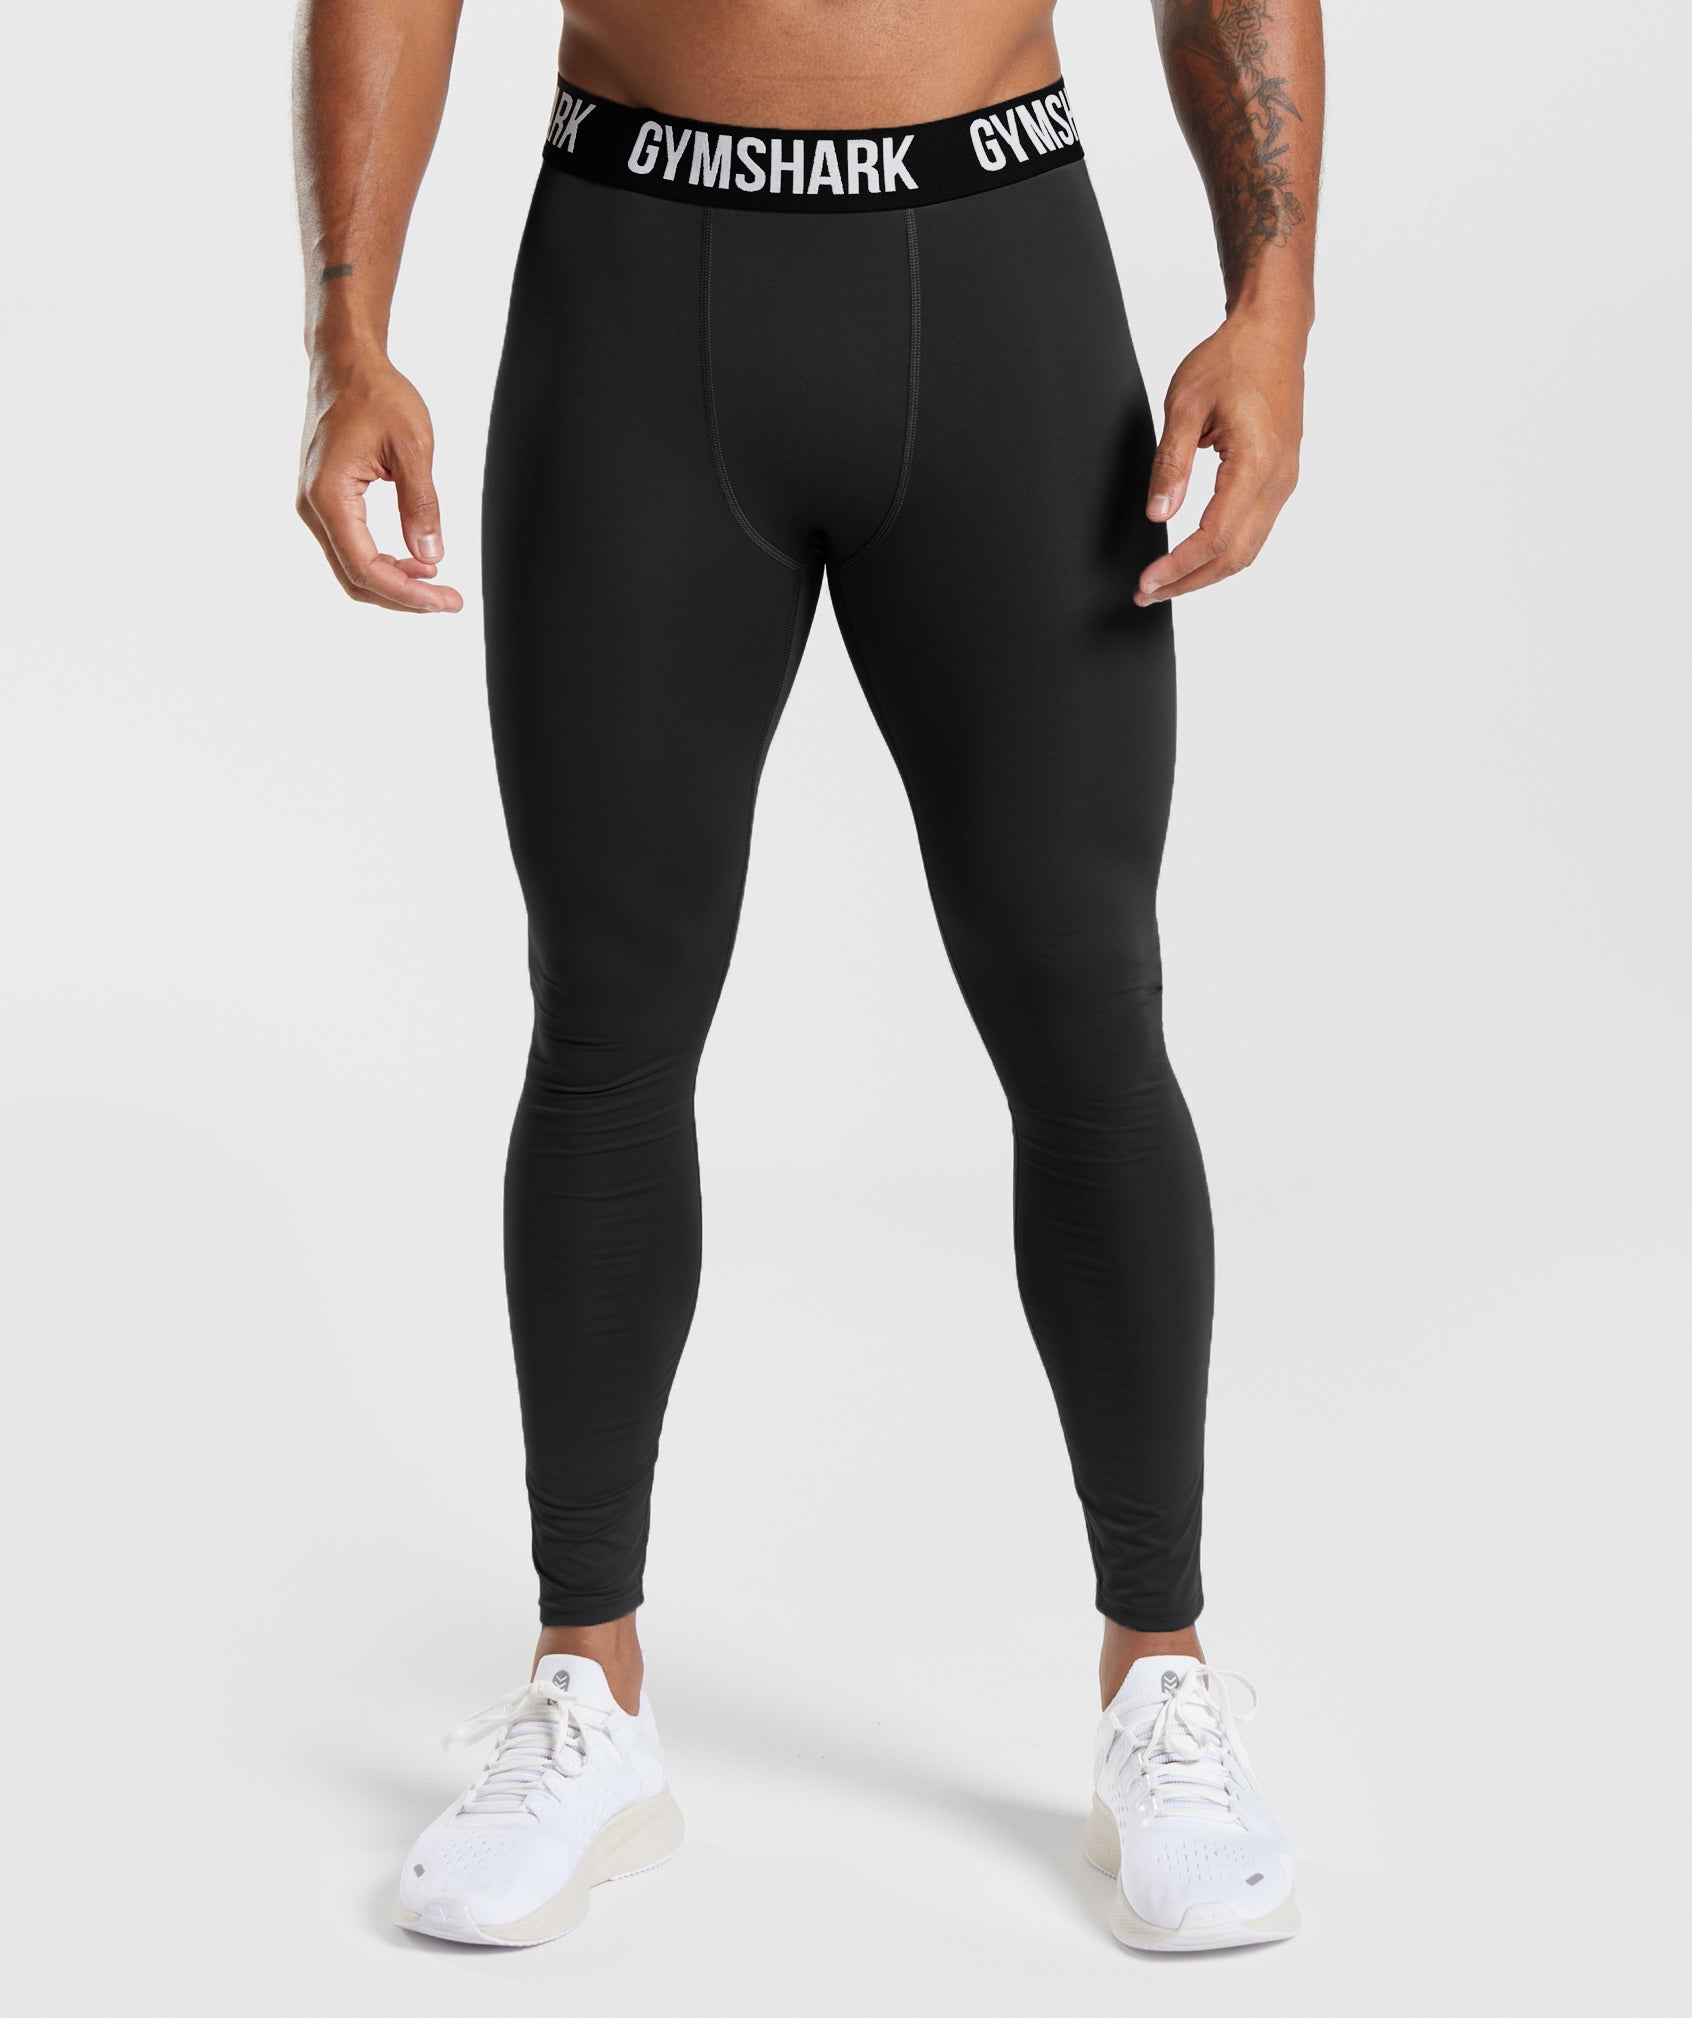 Martin Page on X: My new @Gymshark Element Baselayer Short Sleeve